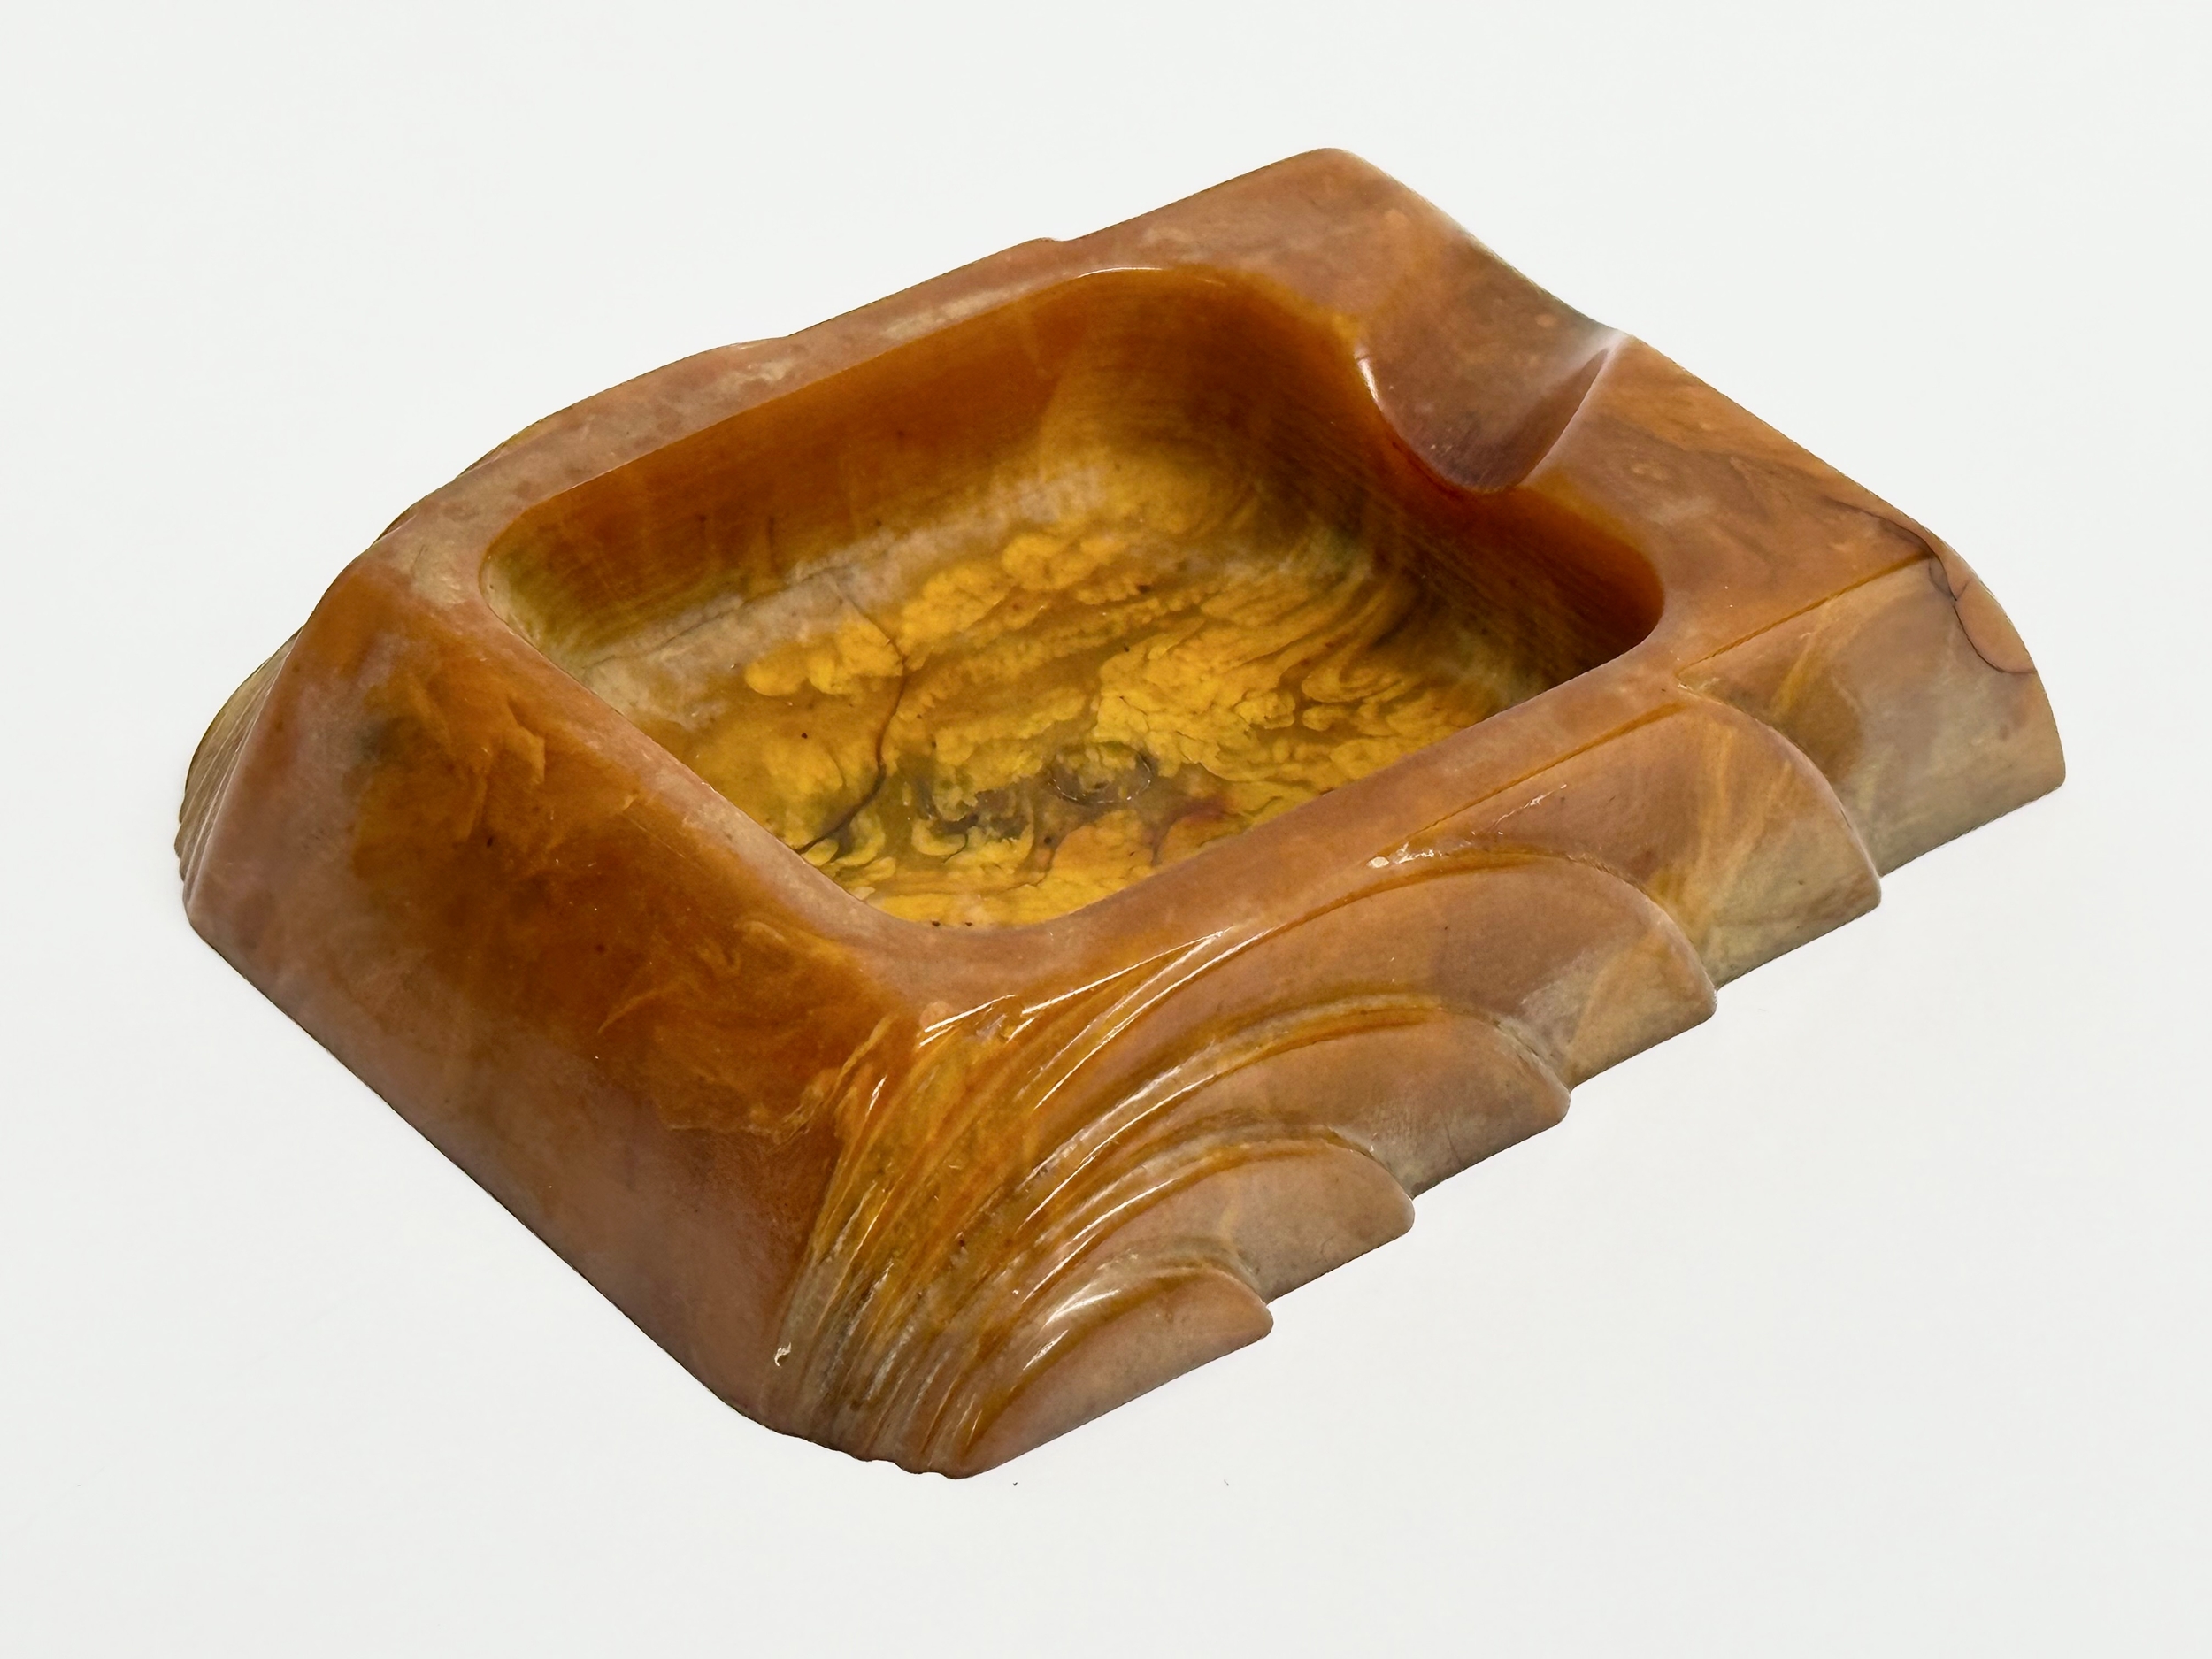 An Art Deco Butterscotch Phenolic Bakelite ashtray by Carvacraft. A Dickenson Product. 8x10cm